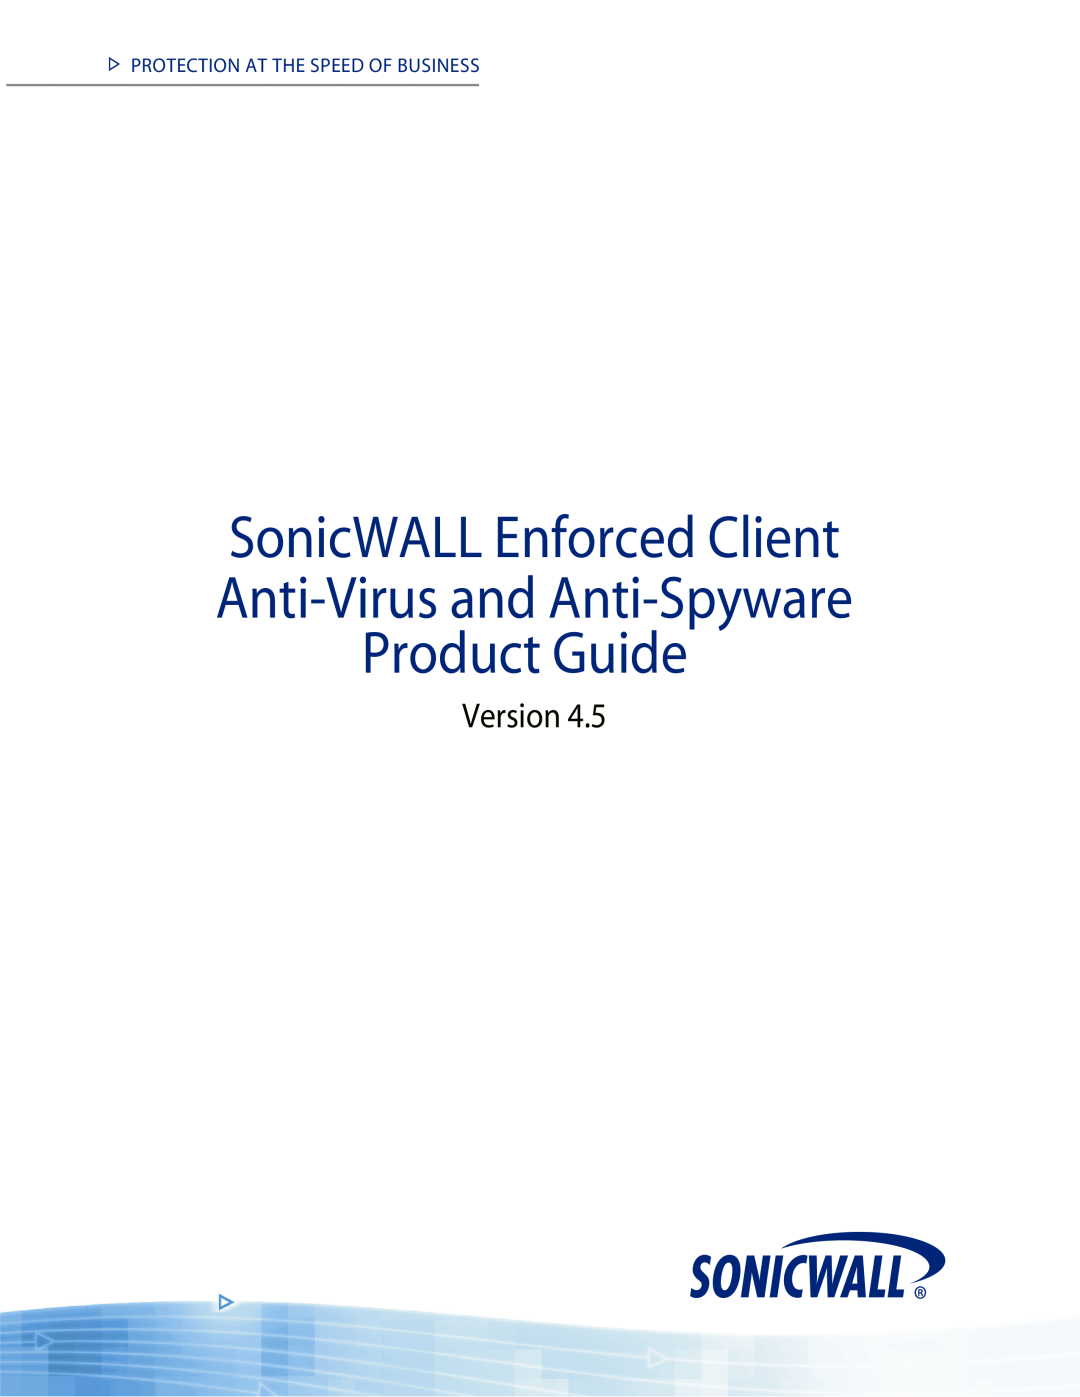 SonicWALL 4.5 manual 3ONIC7!,,C%NFORCED #LIENT !NTI6IRUS AND !NTI3PYWARE 0RODUCTDUIDE, 6ERSIONS 